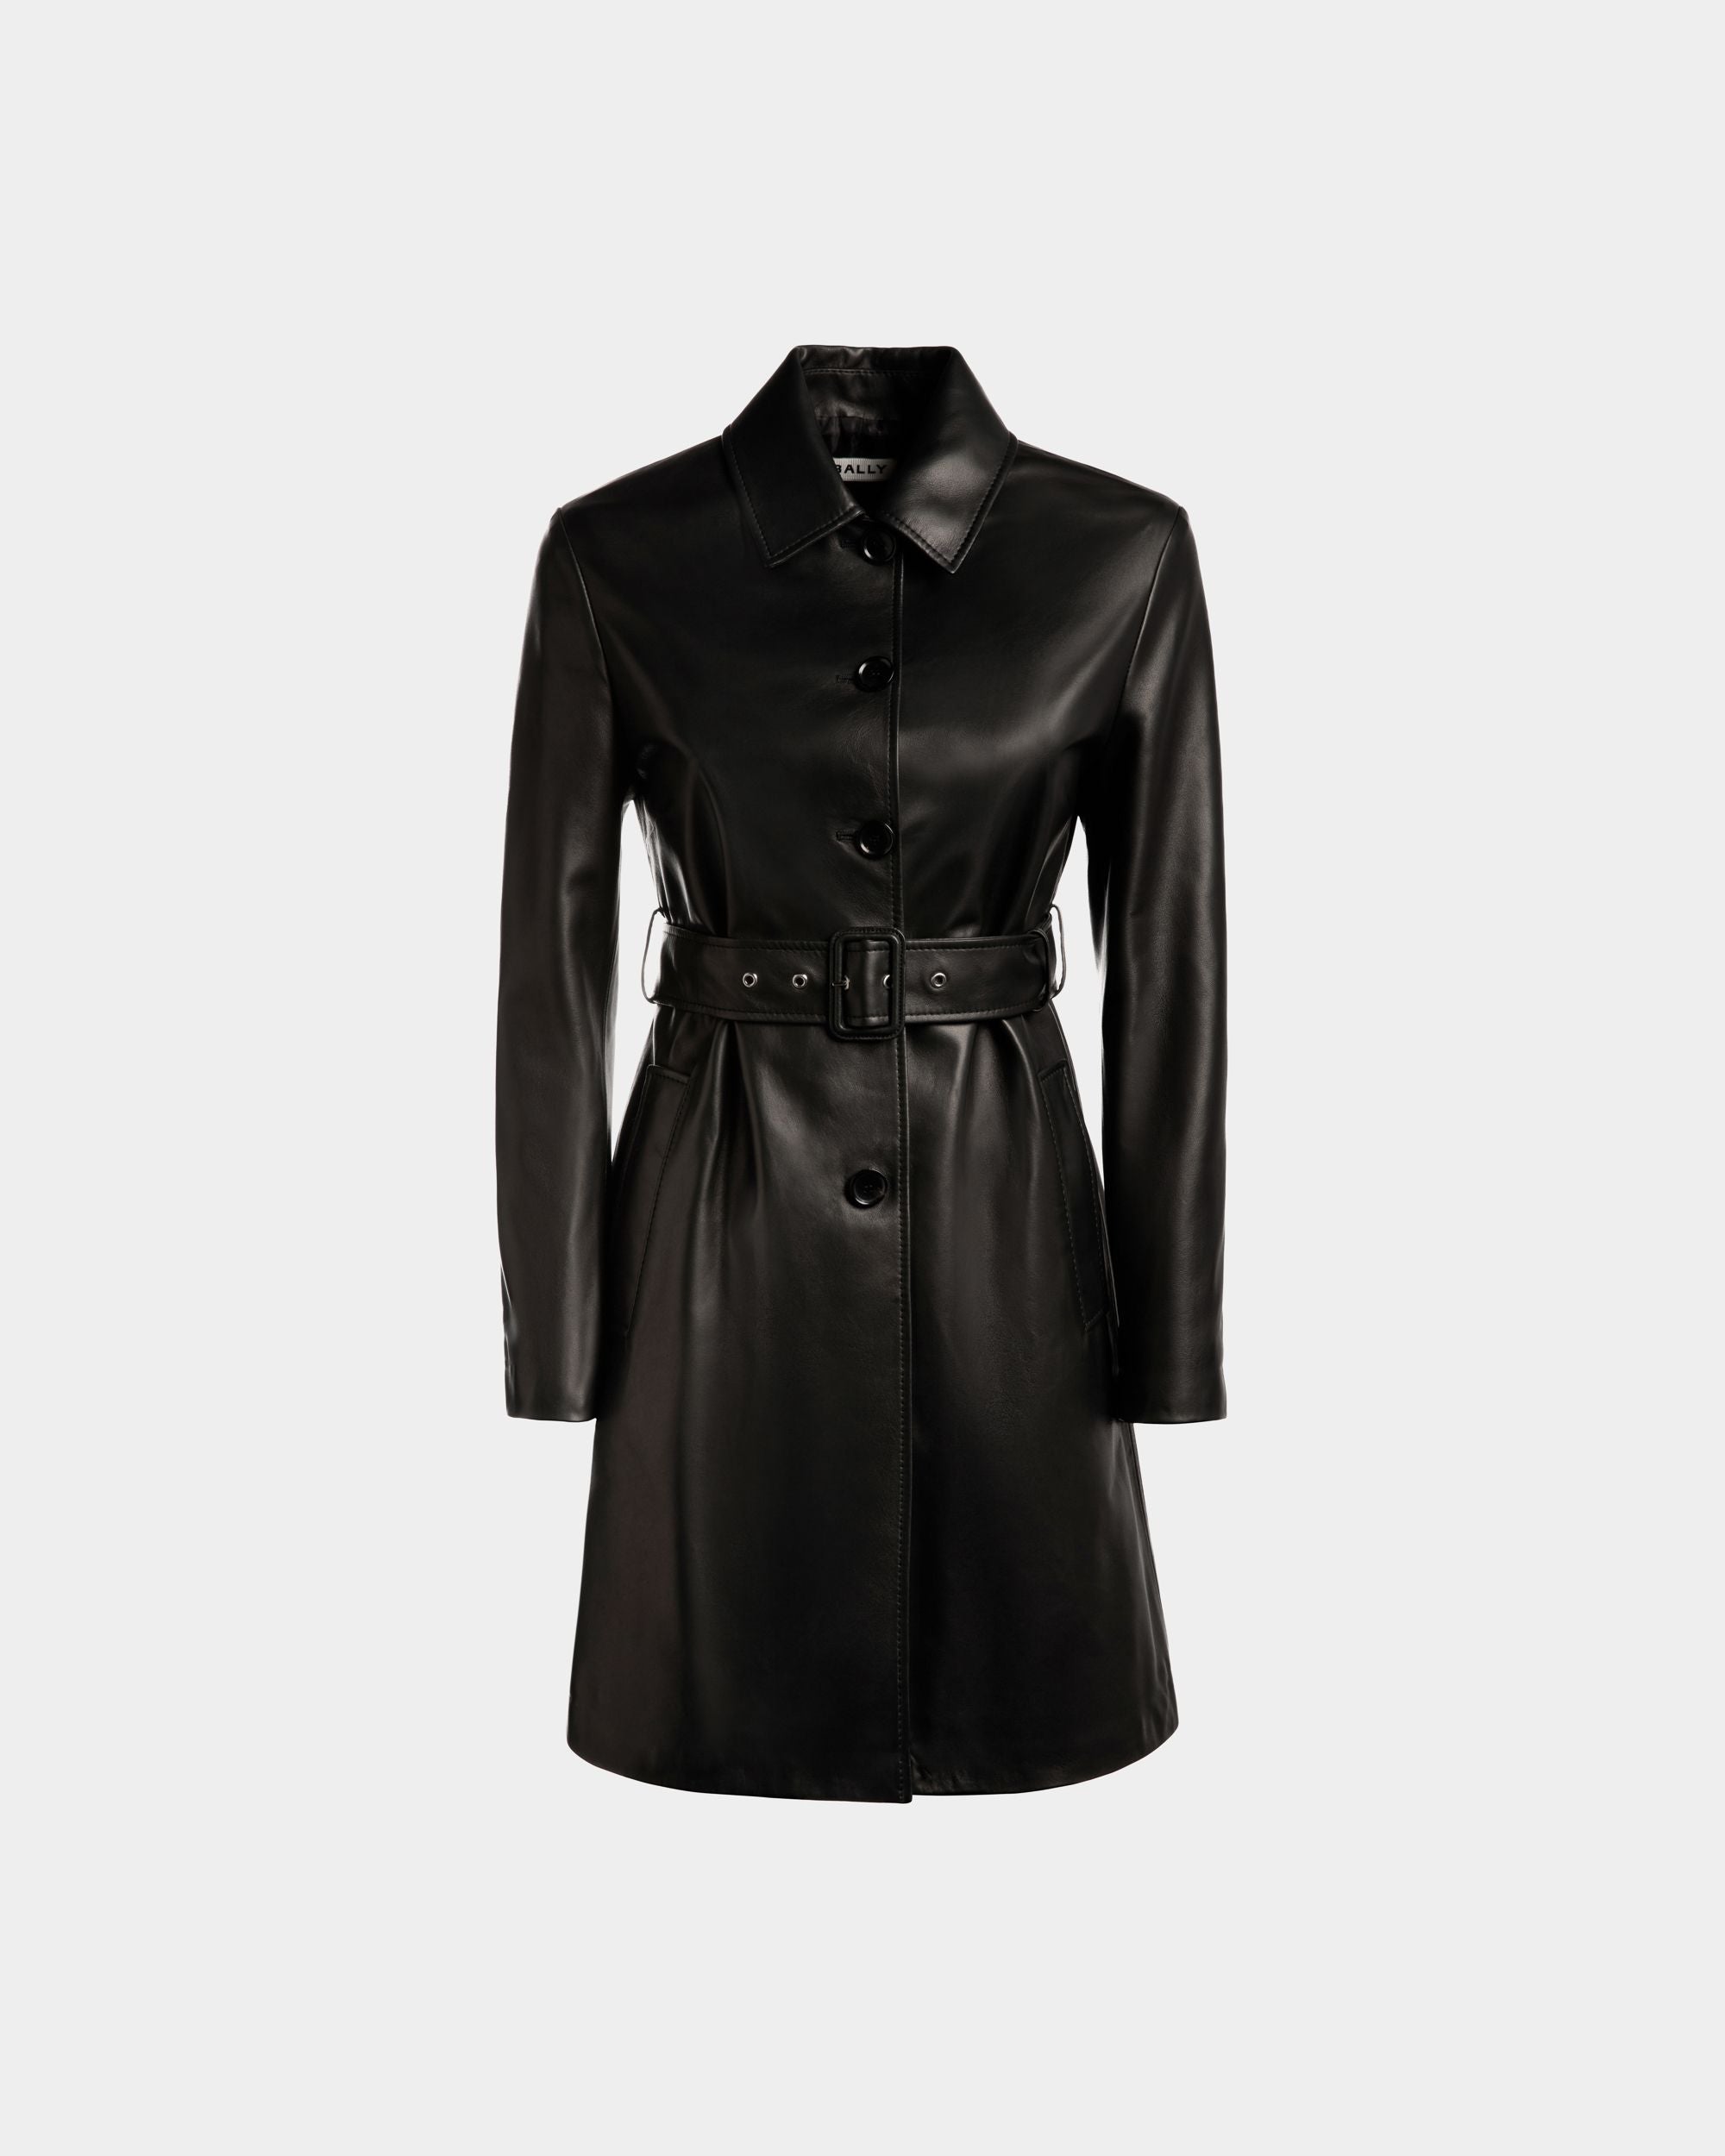 Women's Belted Midi Coat in Black Leather | Bally | Still Life Front